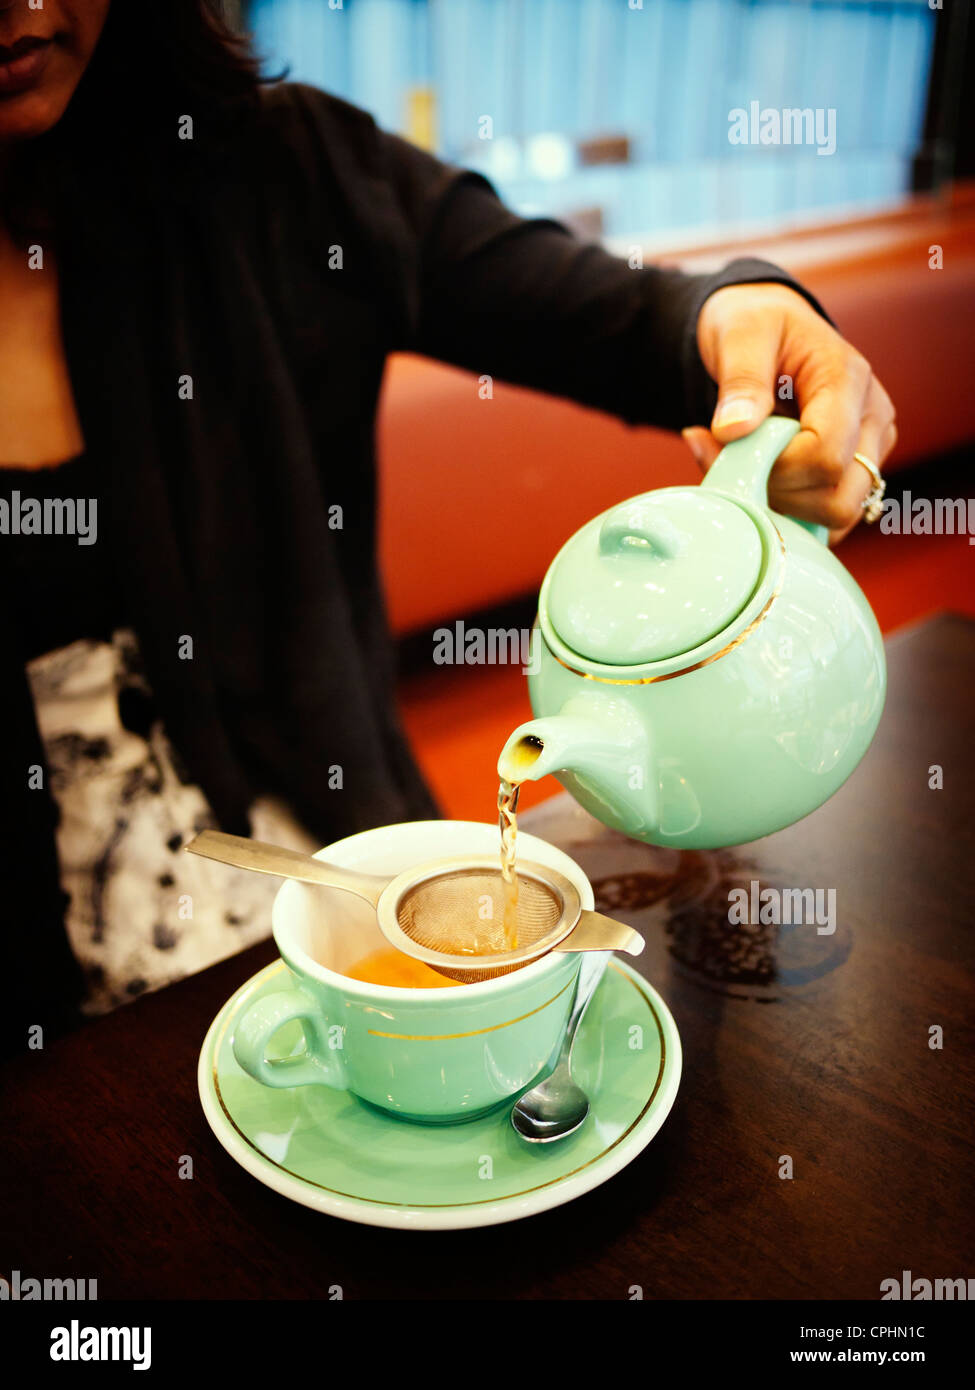 Woman pours cup of tea in cafe. Stock Photo